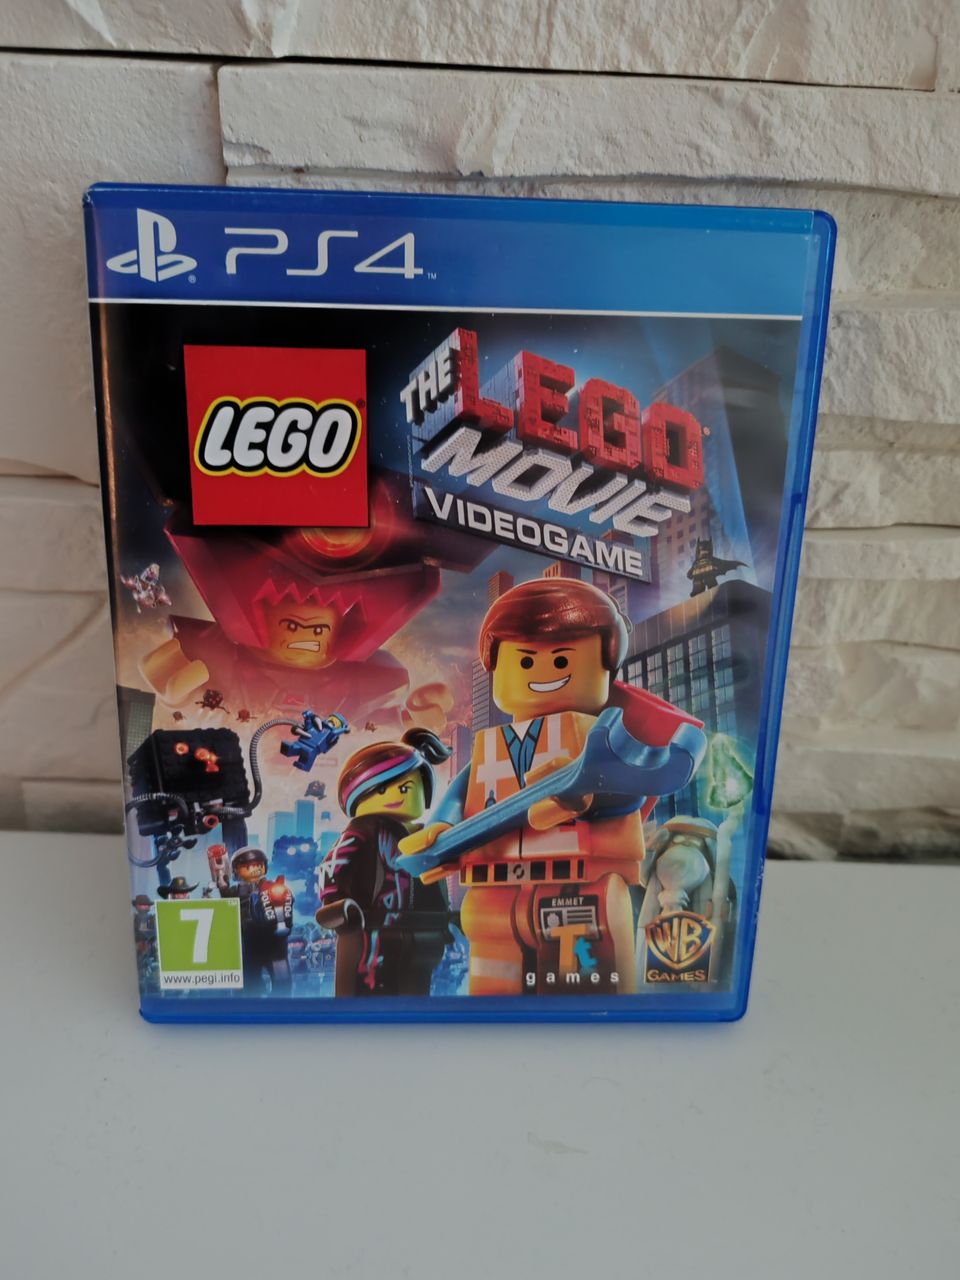 PS 4 Lego Movie Videogame